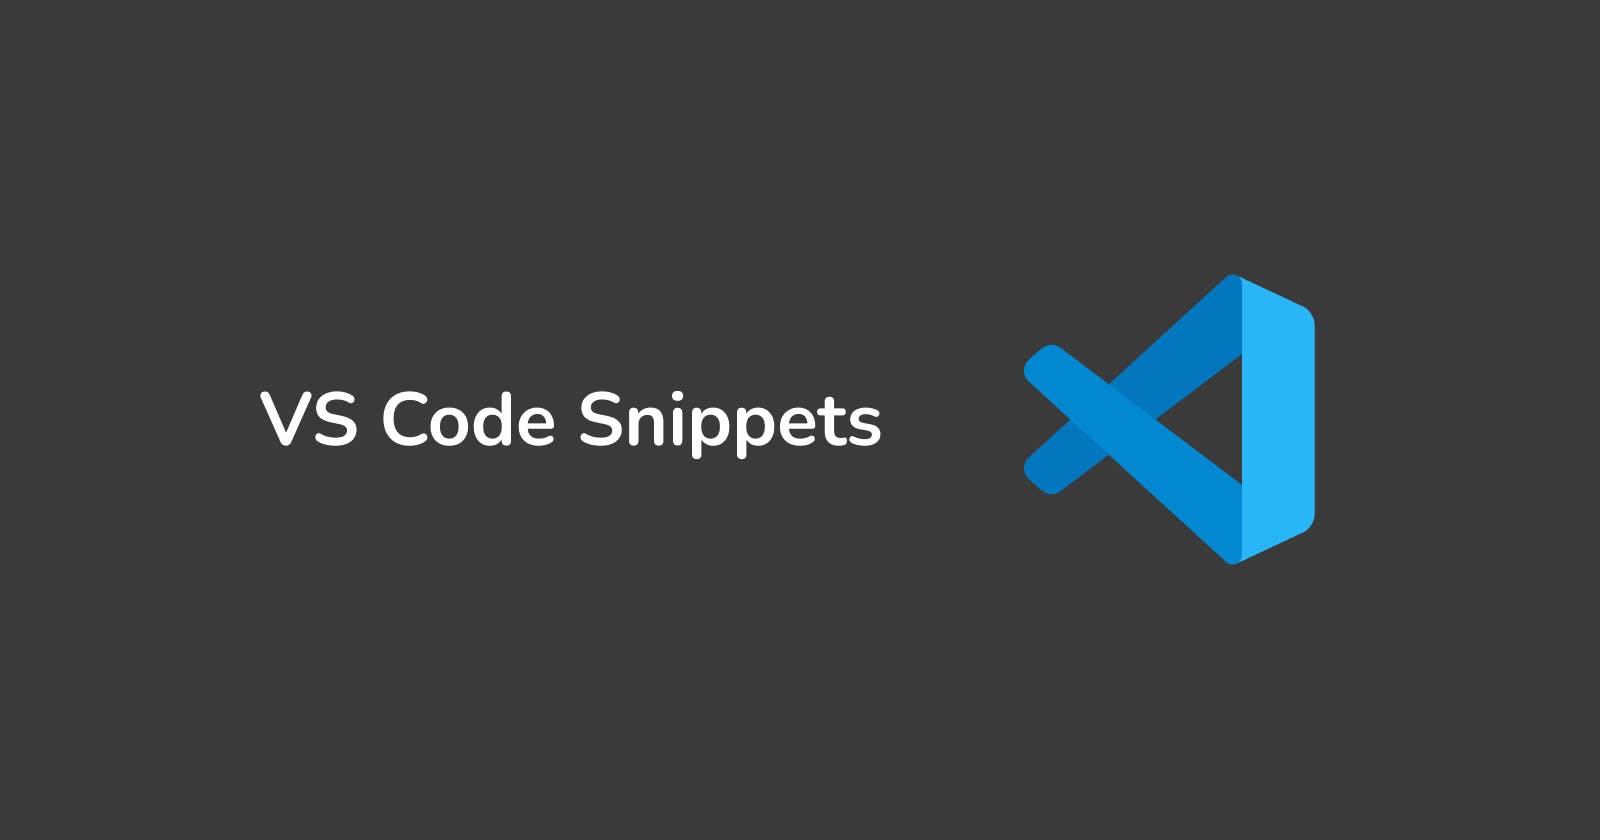 What are Snippets in VSCode?